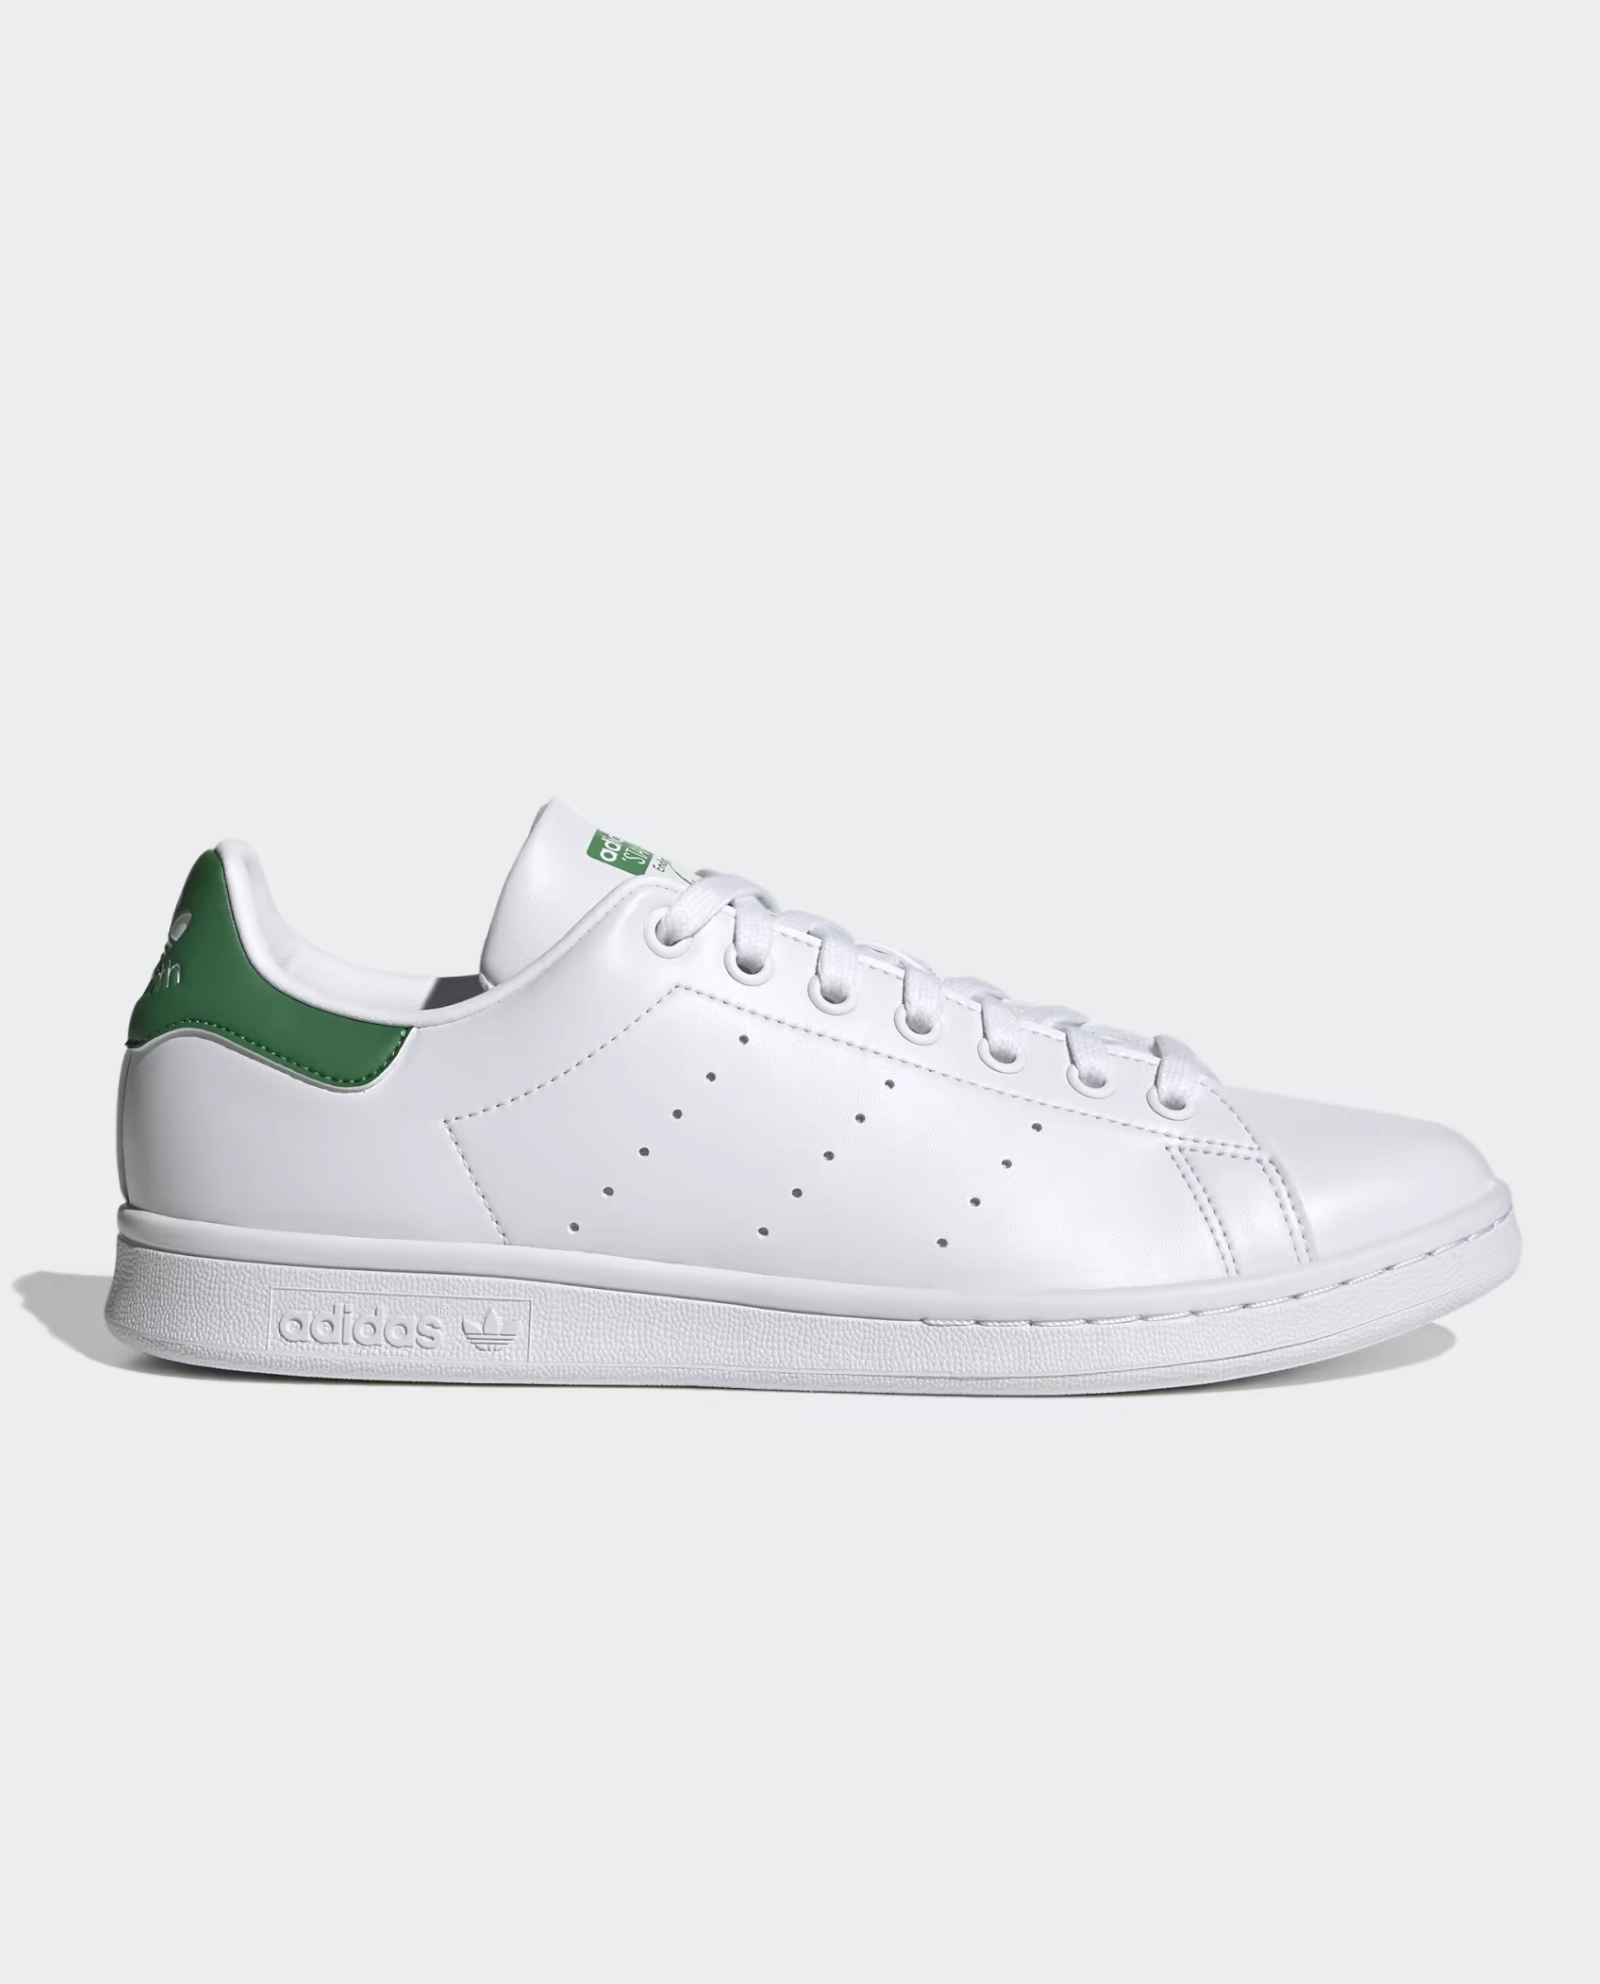 Addidas Stan Smith Shoelace Length